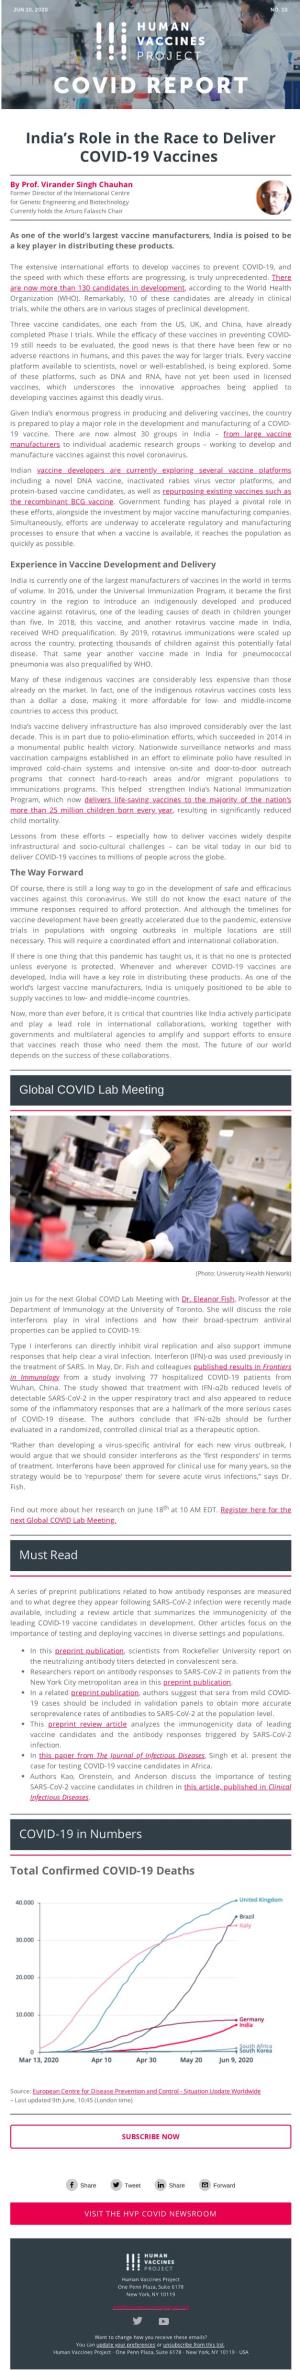 India's Role in the Race to Deliver COVID-19 Vaccines